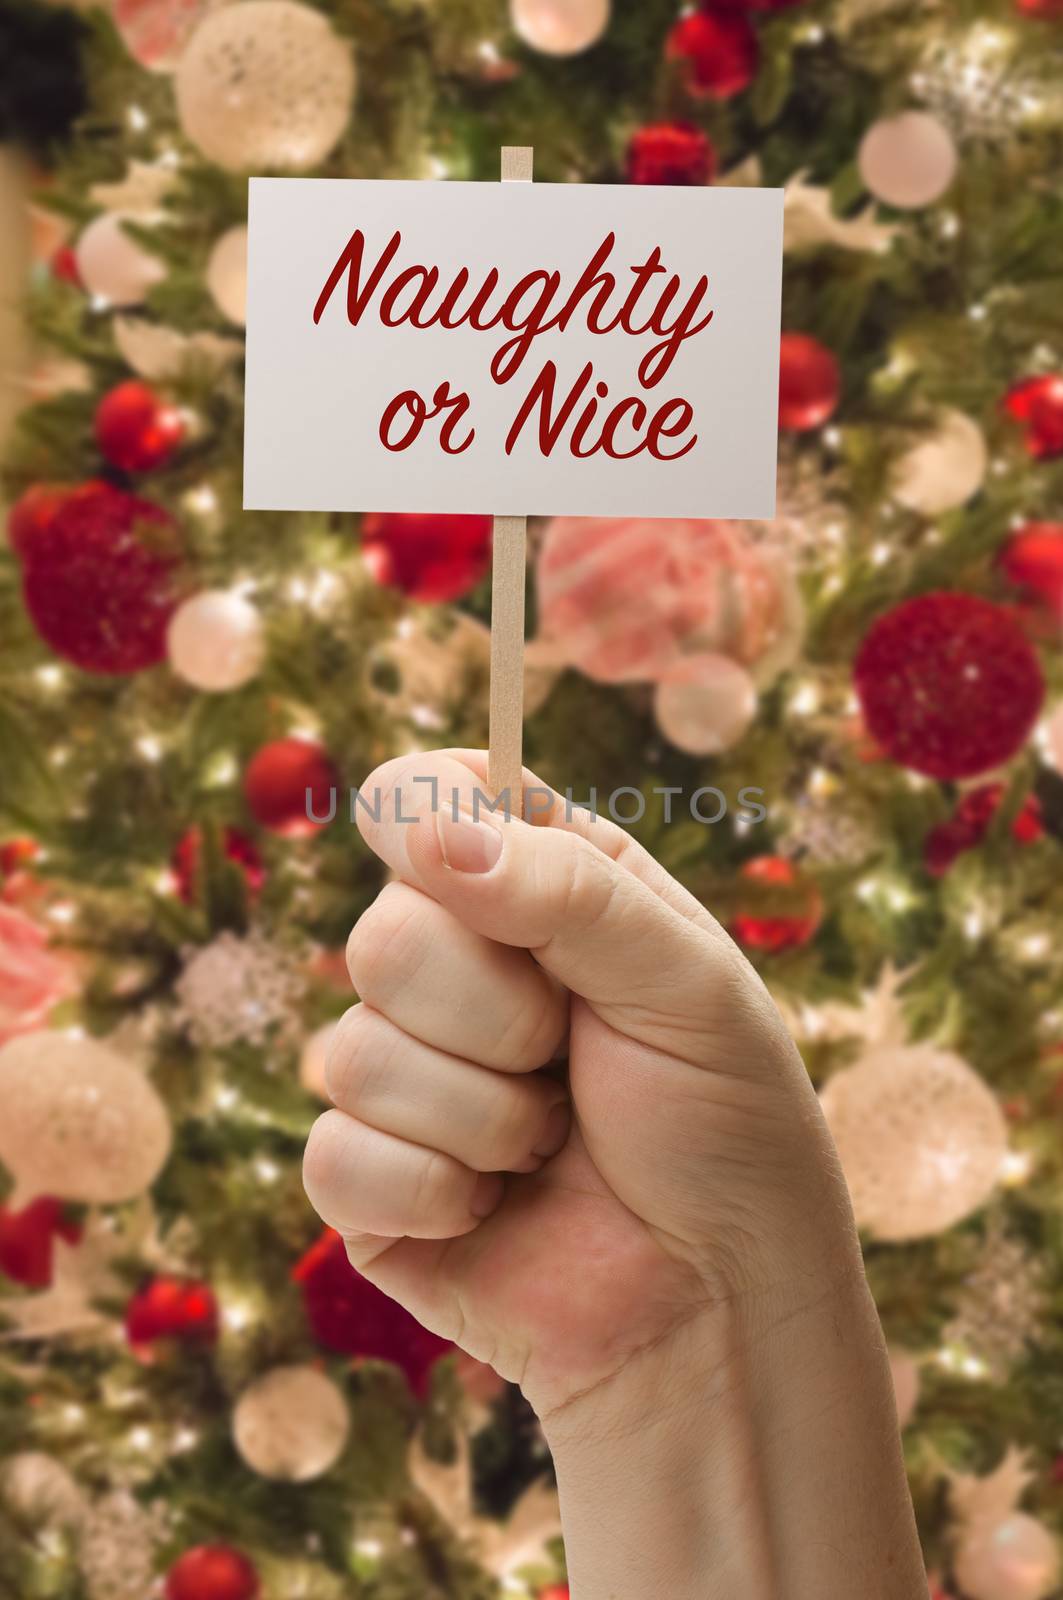 Hand Holding Naughty of Nice Card In Front of Decorated Christmas Tree.